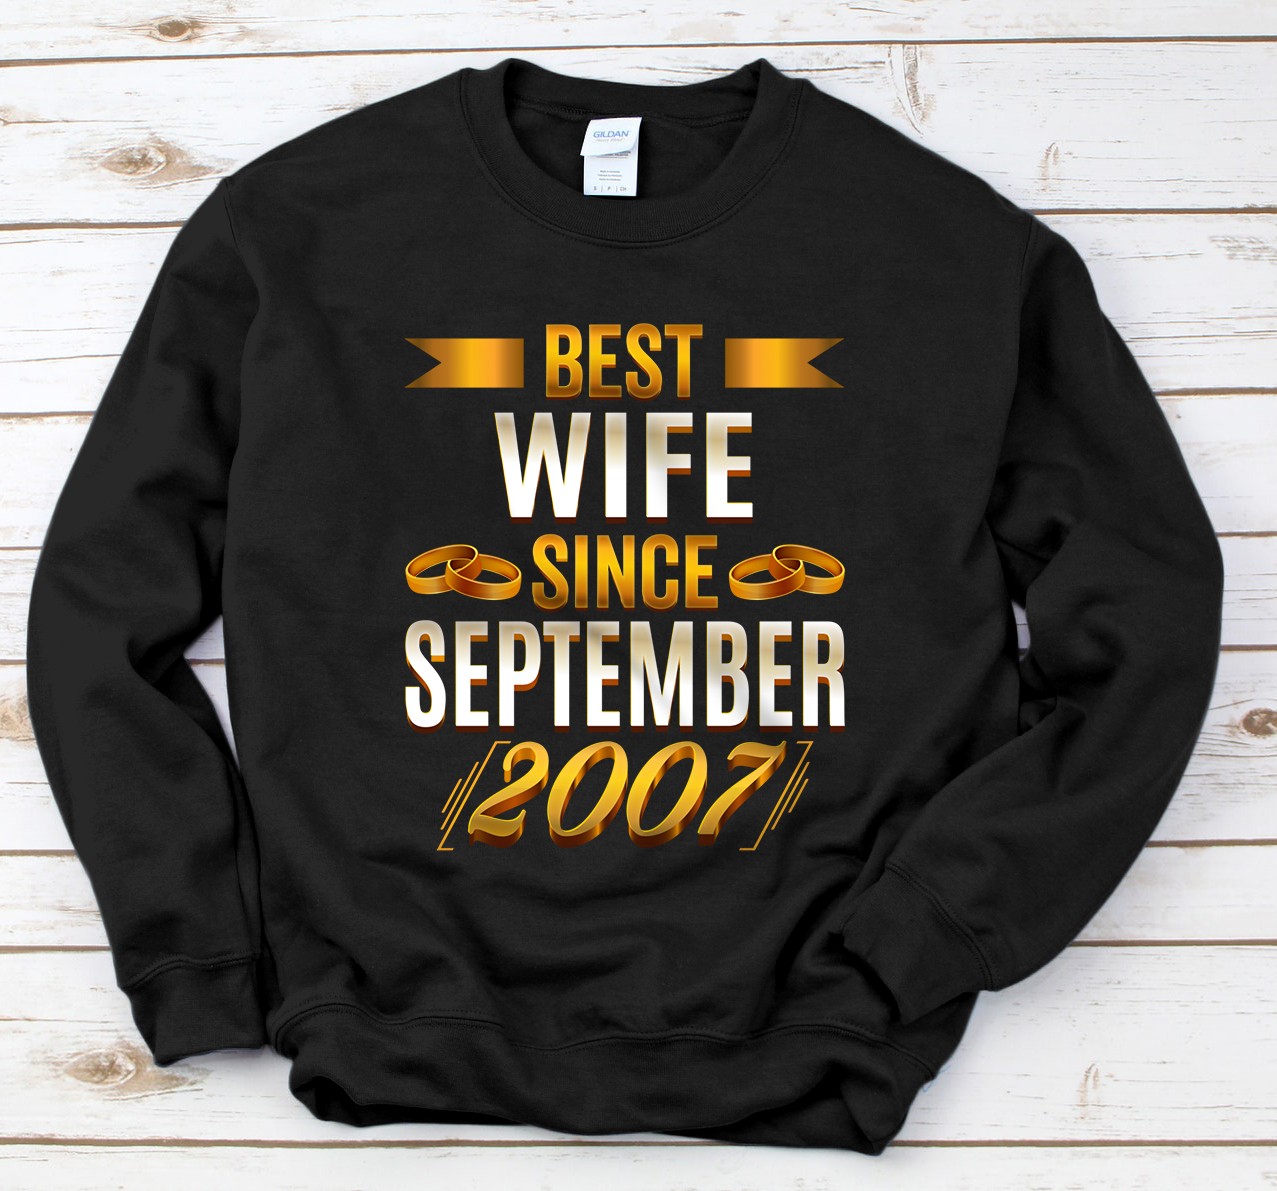 Personalized Best Wife Since September 2007 - Funny 14th Anniversary Wife Sweatshirt